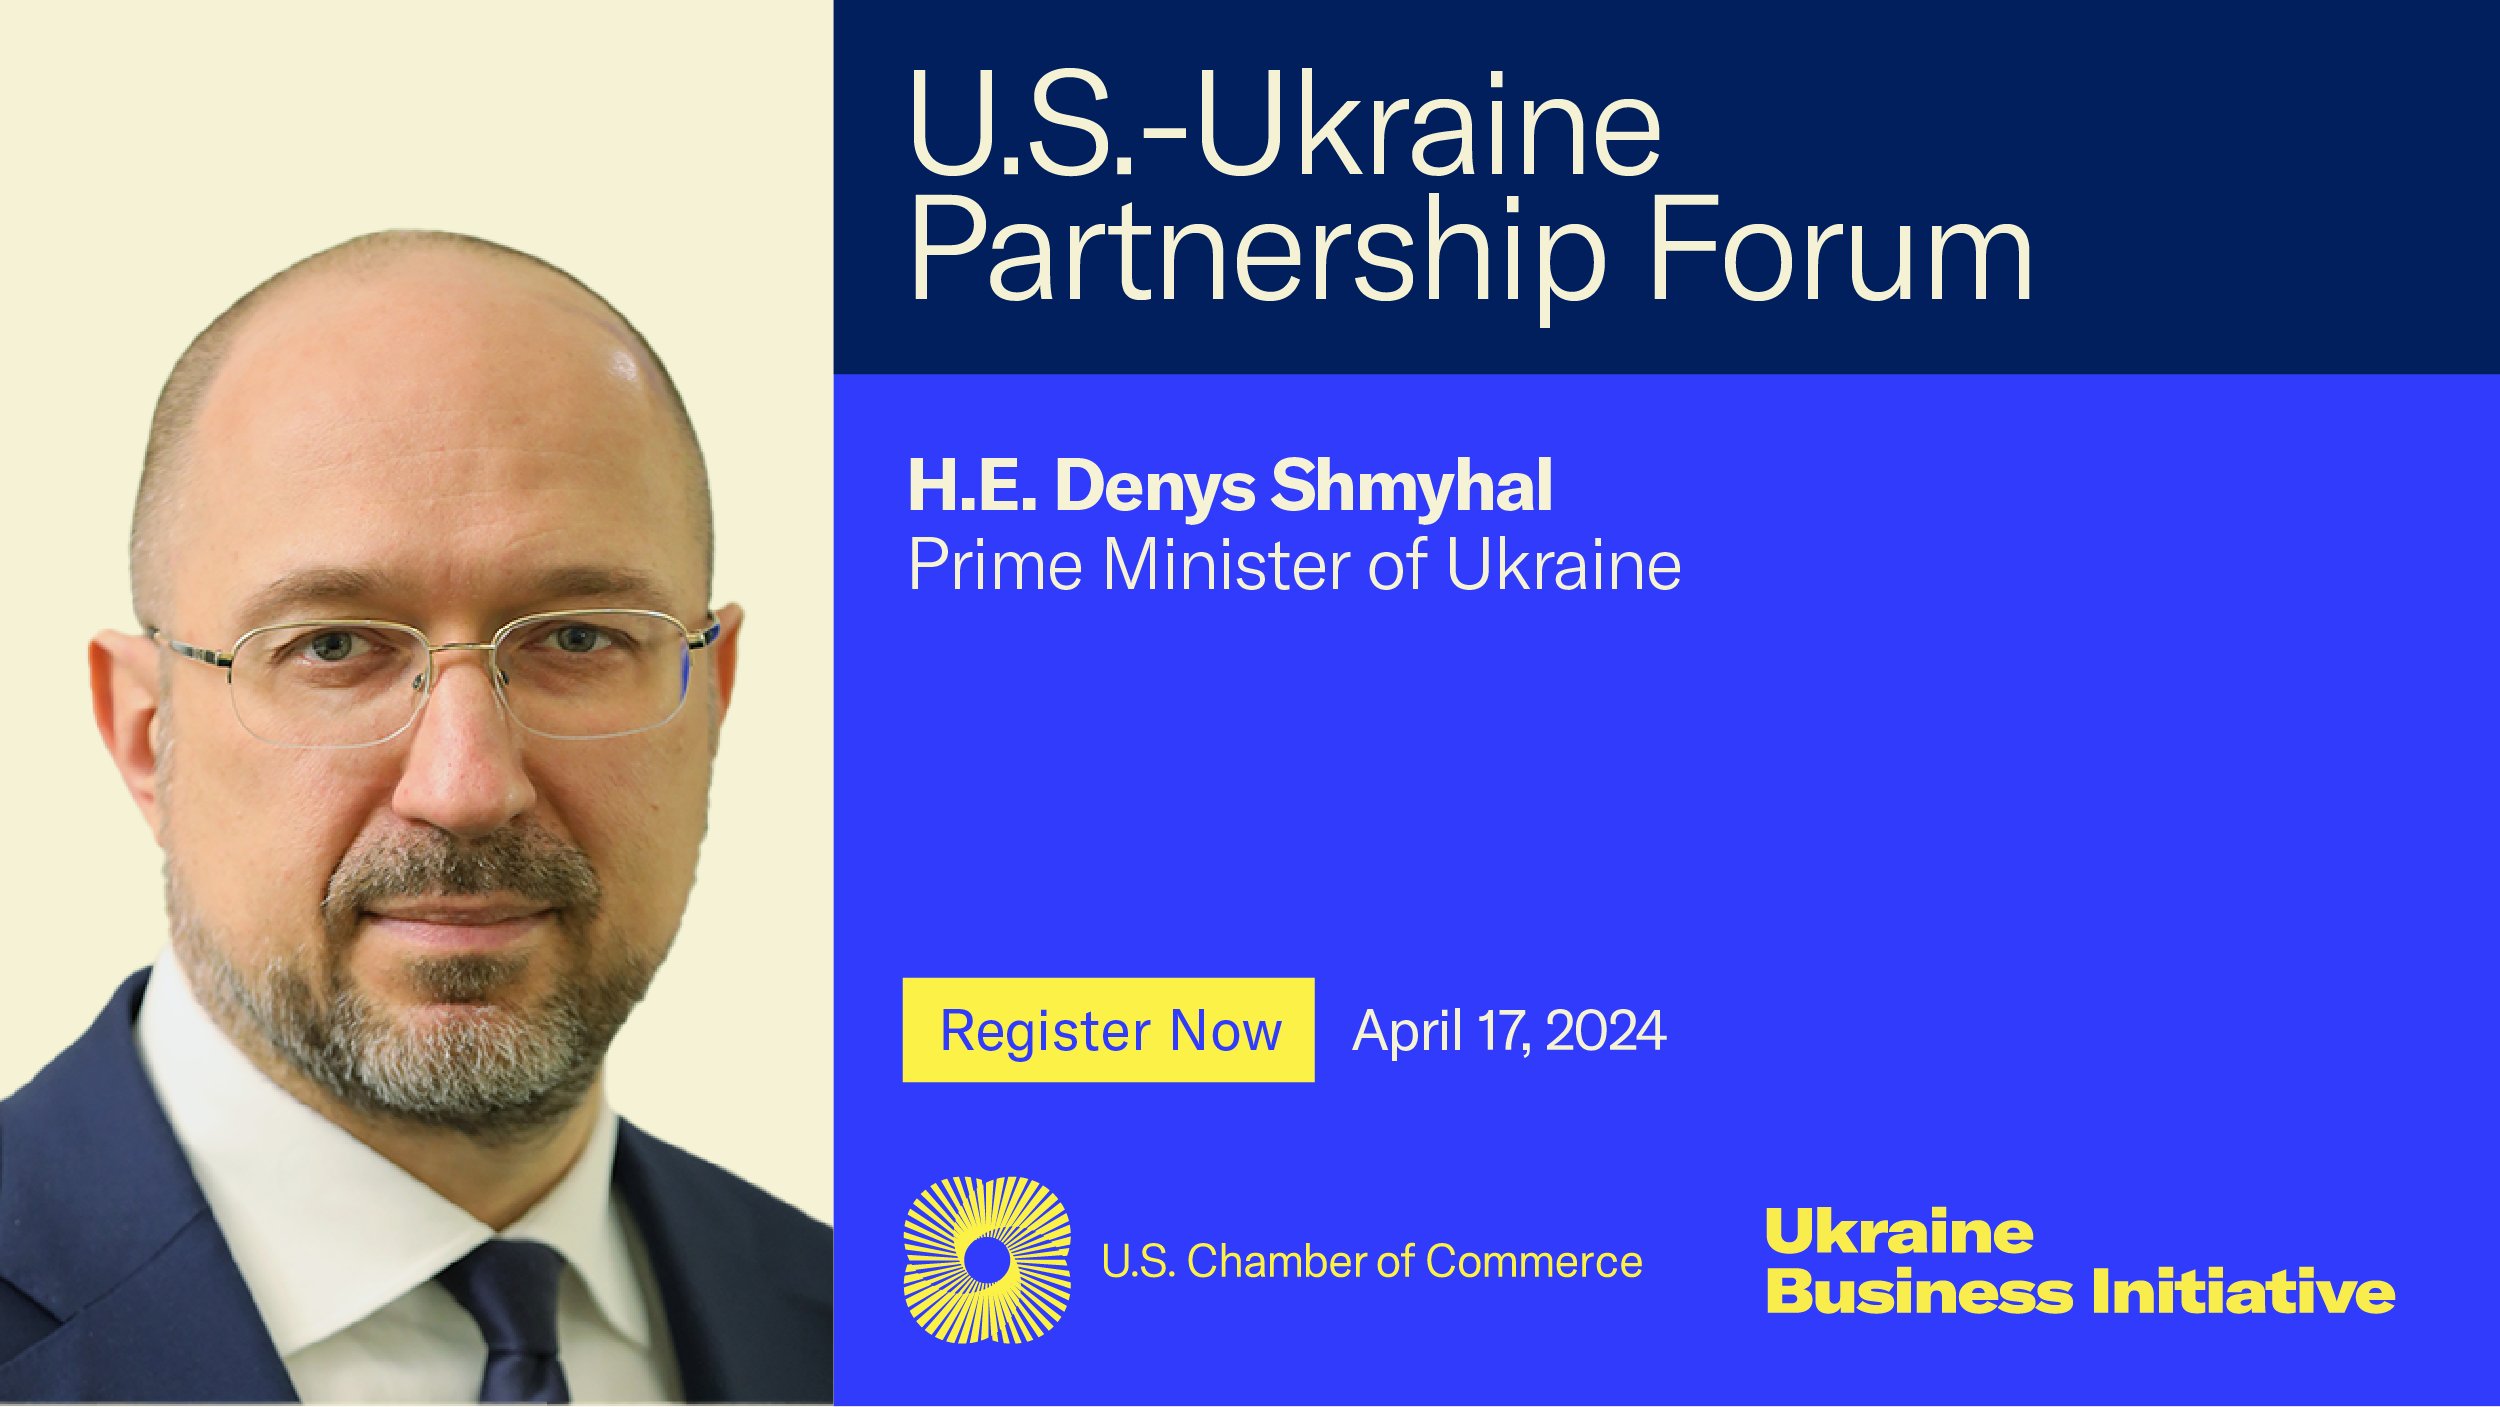 U.S. Chamber on X: "We're honored to host Prime Minister Denys Shmyhal next  week along with many other esteemed speakers for our  #UkrainePartnershipForum. 🇺🇦 As Ukraine works to stabilize its economy and